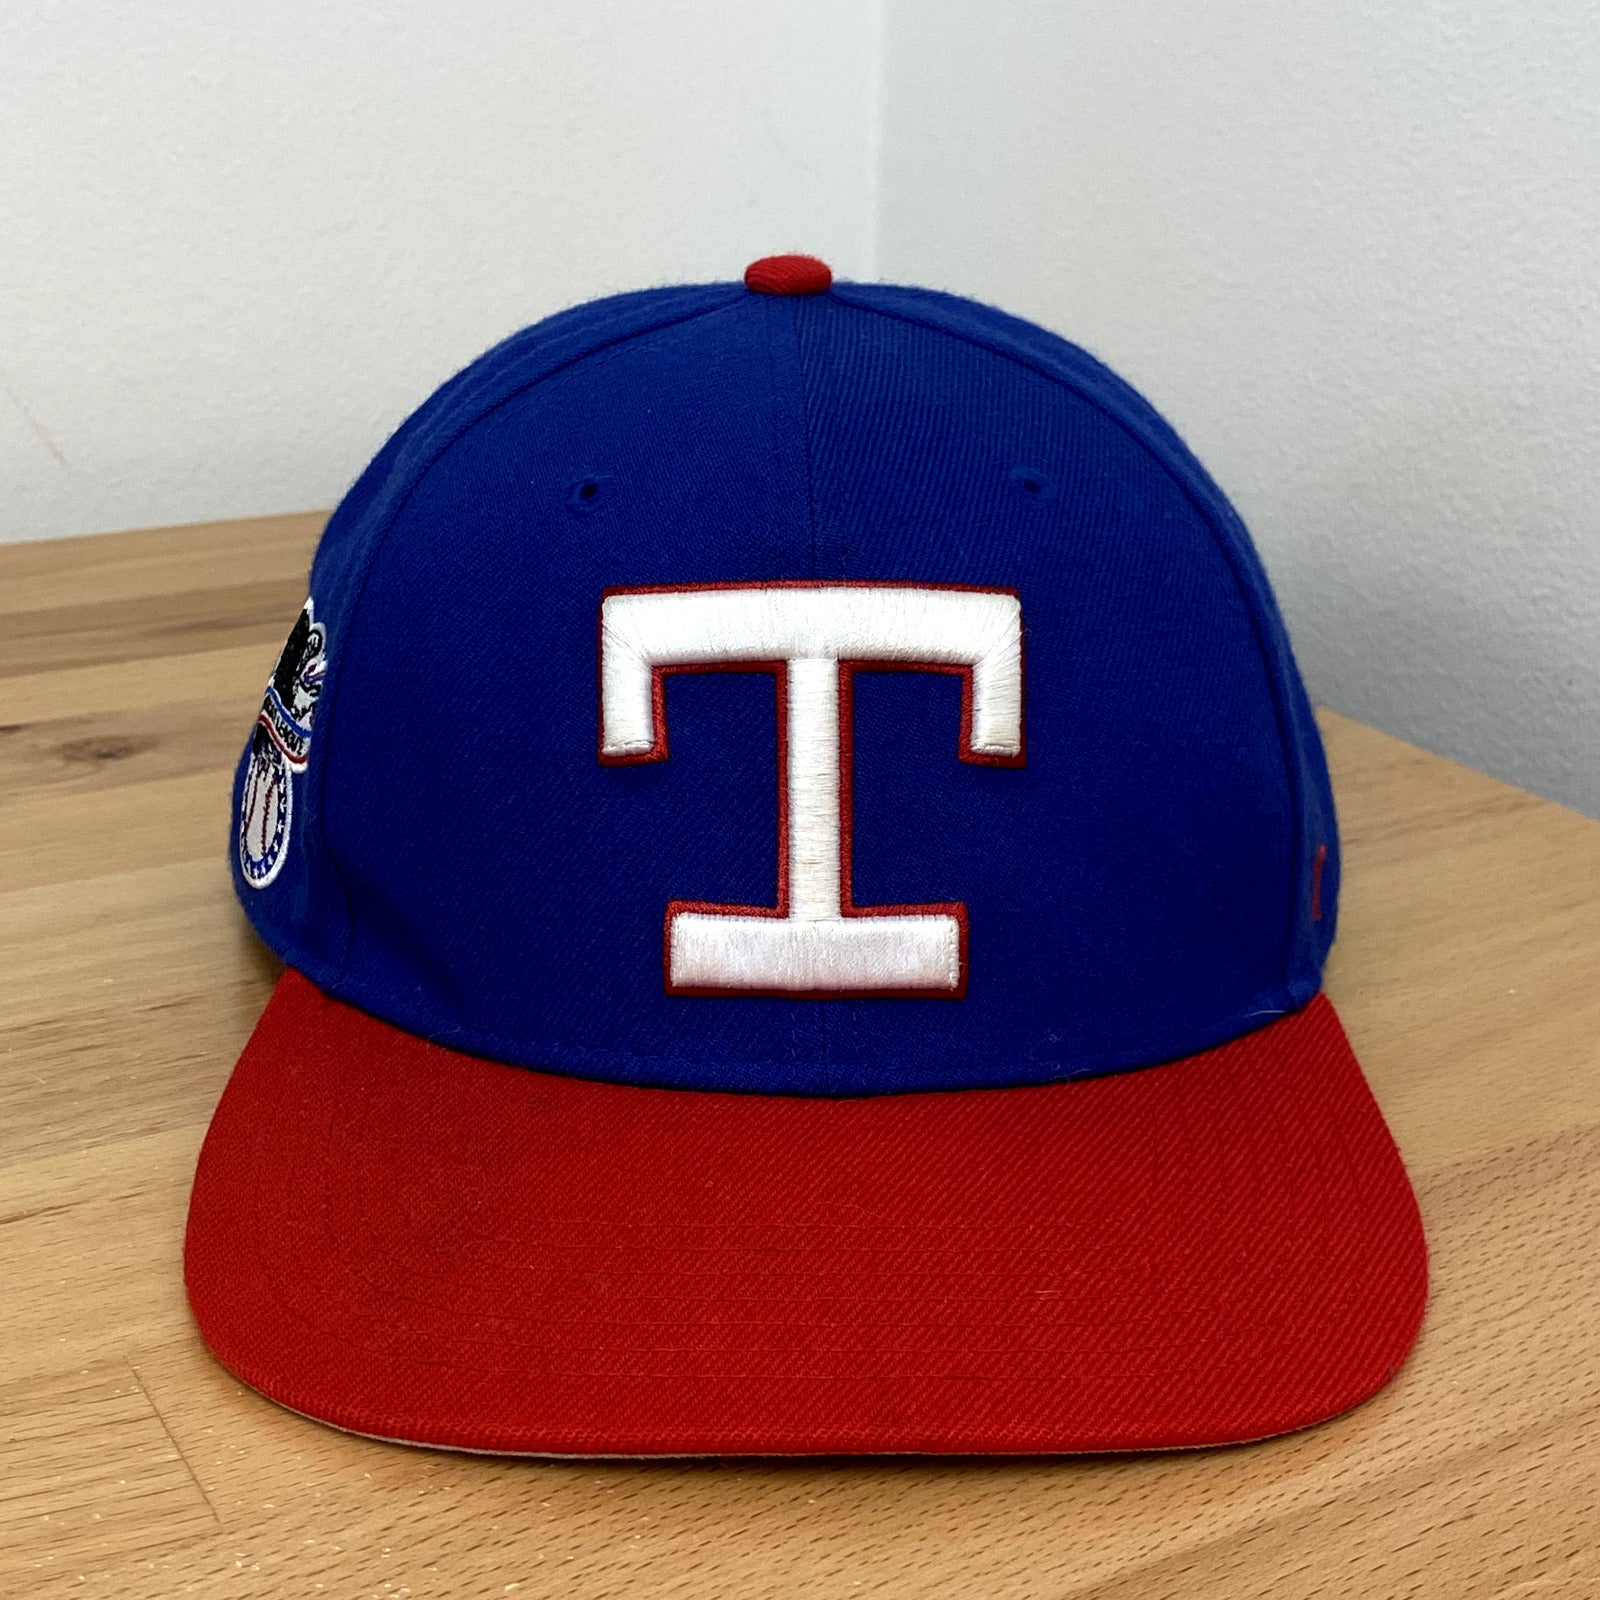 '47 Brand Blue Solid American League Texas Rangers Baseball Cap One Size Fit All